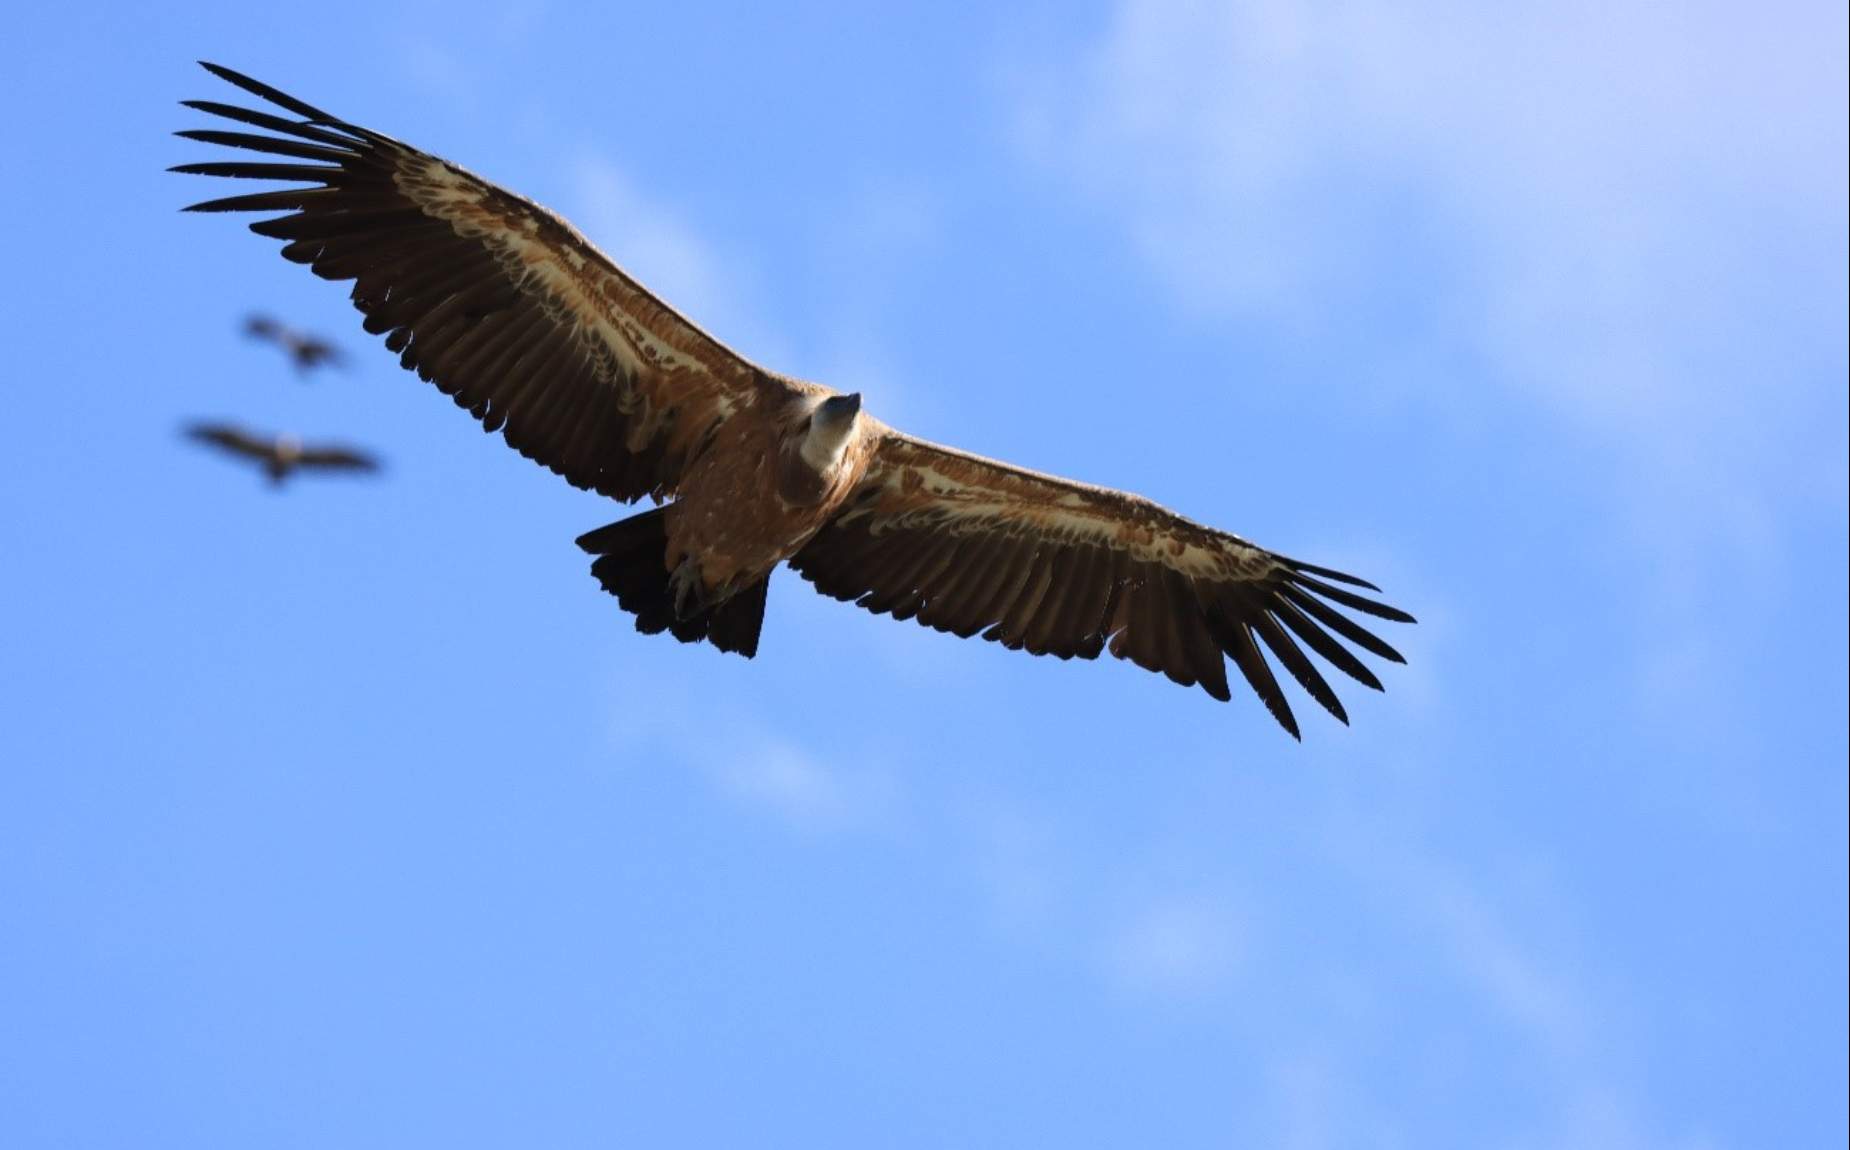 Griffon vulture flying through the sky.